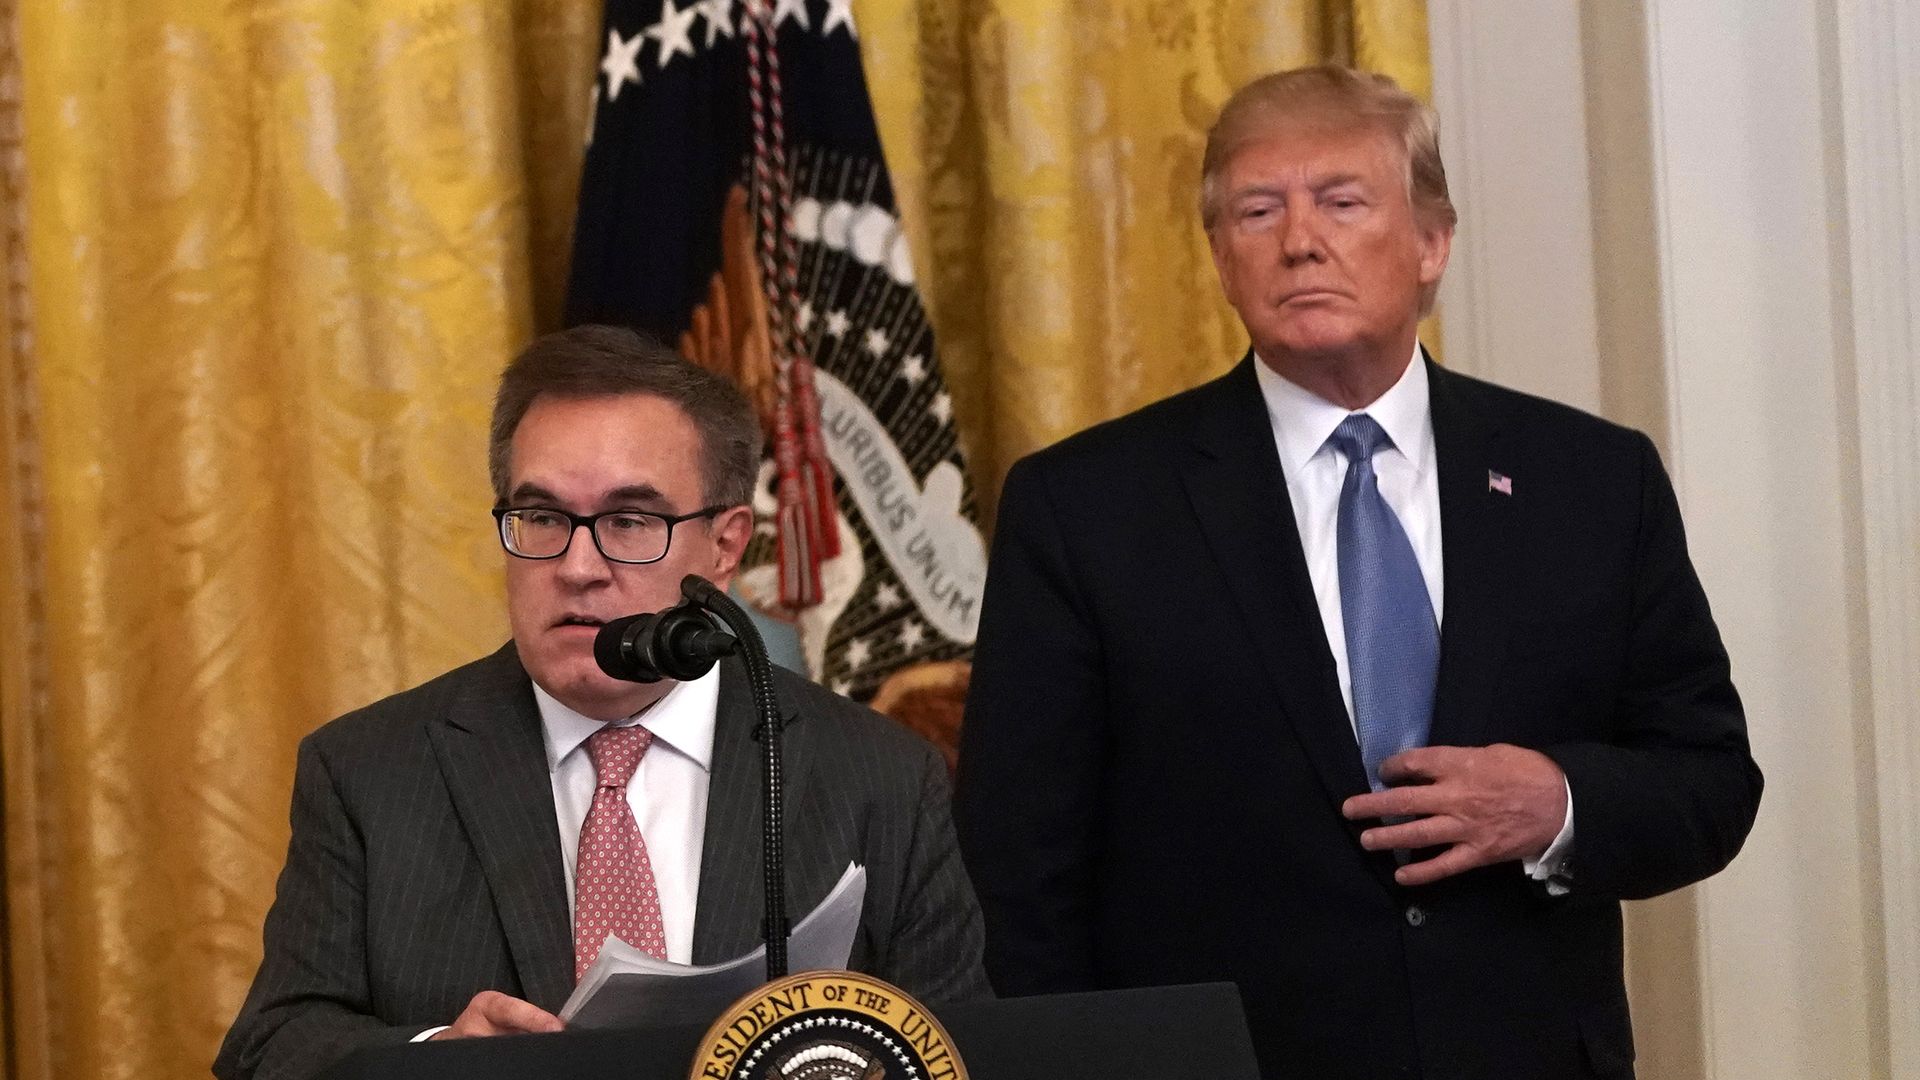 Environmental Protection Agency Administrator Andrew Wheeler (L) speaks as President Donald Trump (R) looks on during an East Room event on the environment July 7, 2019 at the White House 